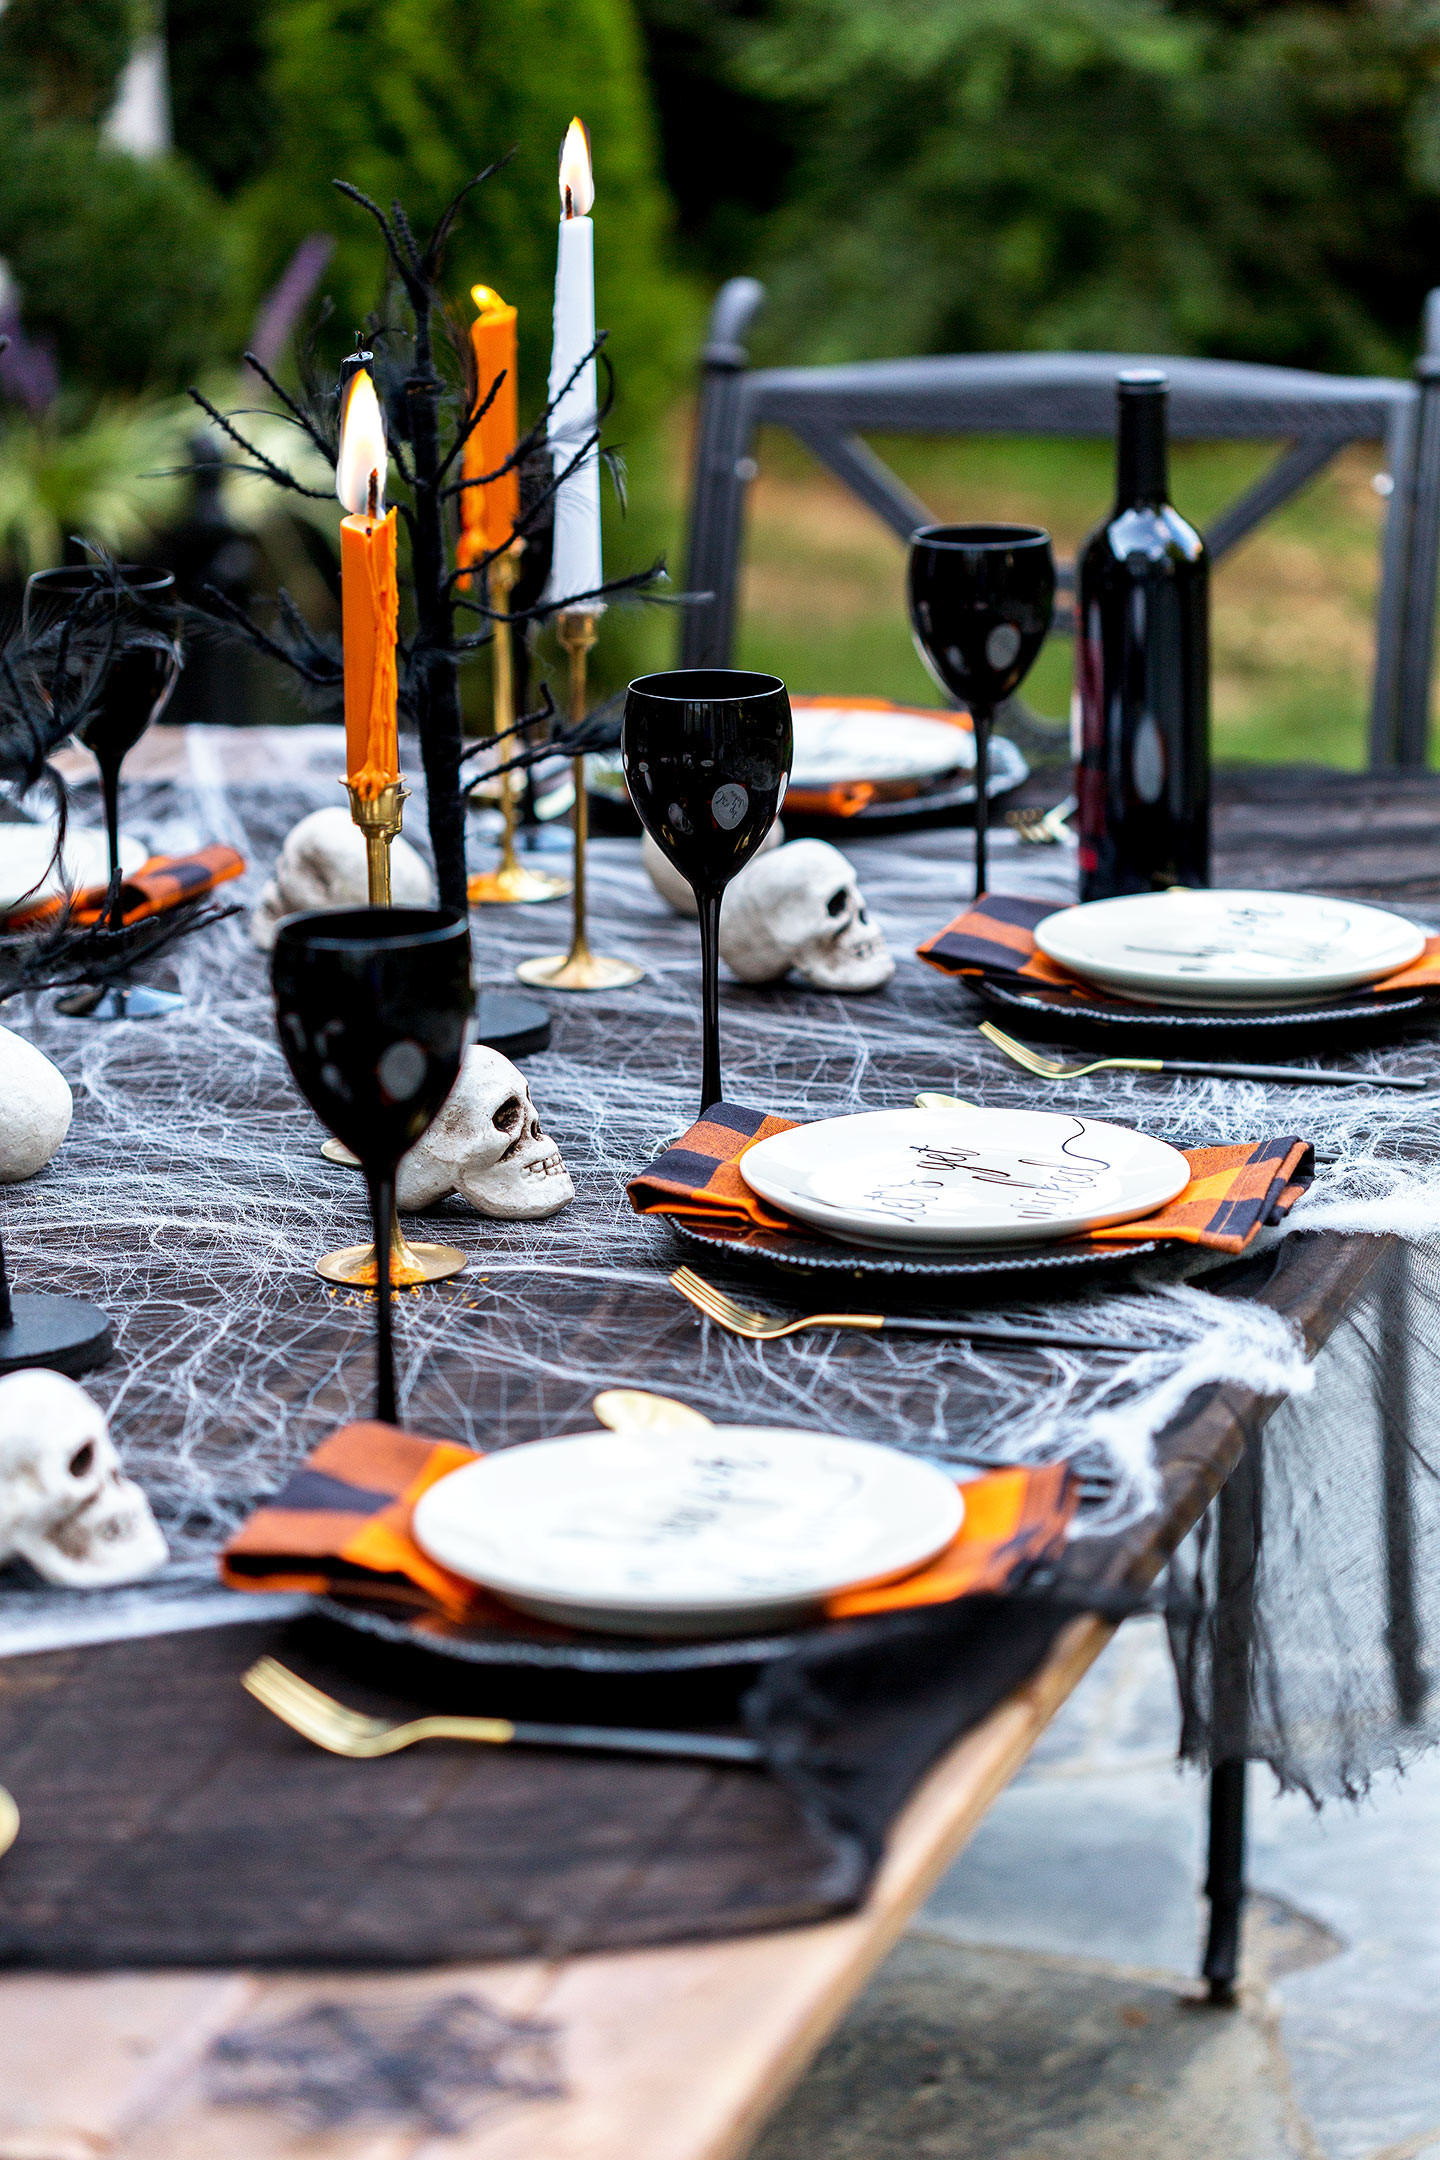 Halloween Party Decorations Ideas
 Adult Halloween Party Decorations & Halloween Menu Ideas